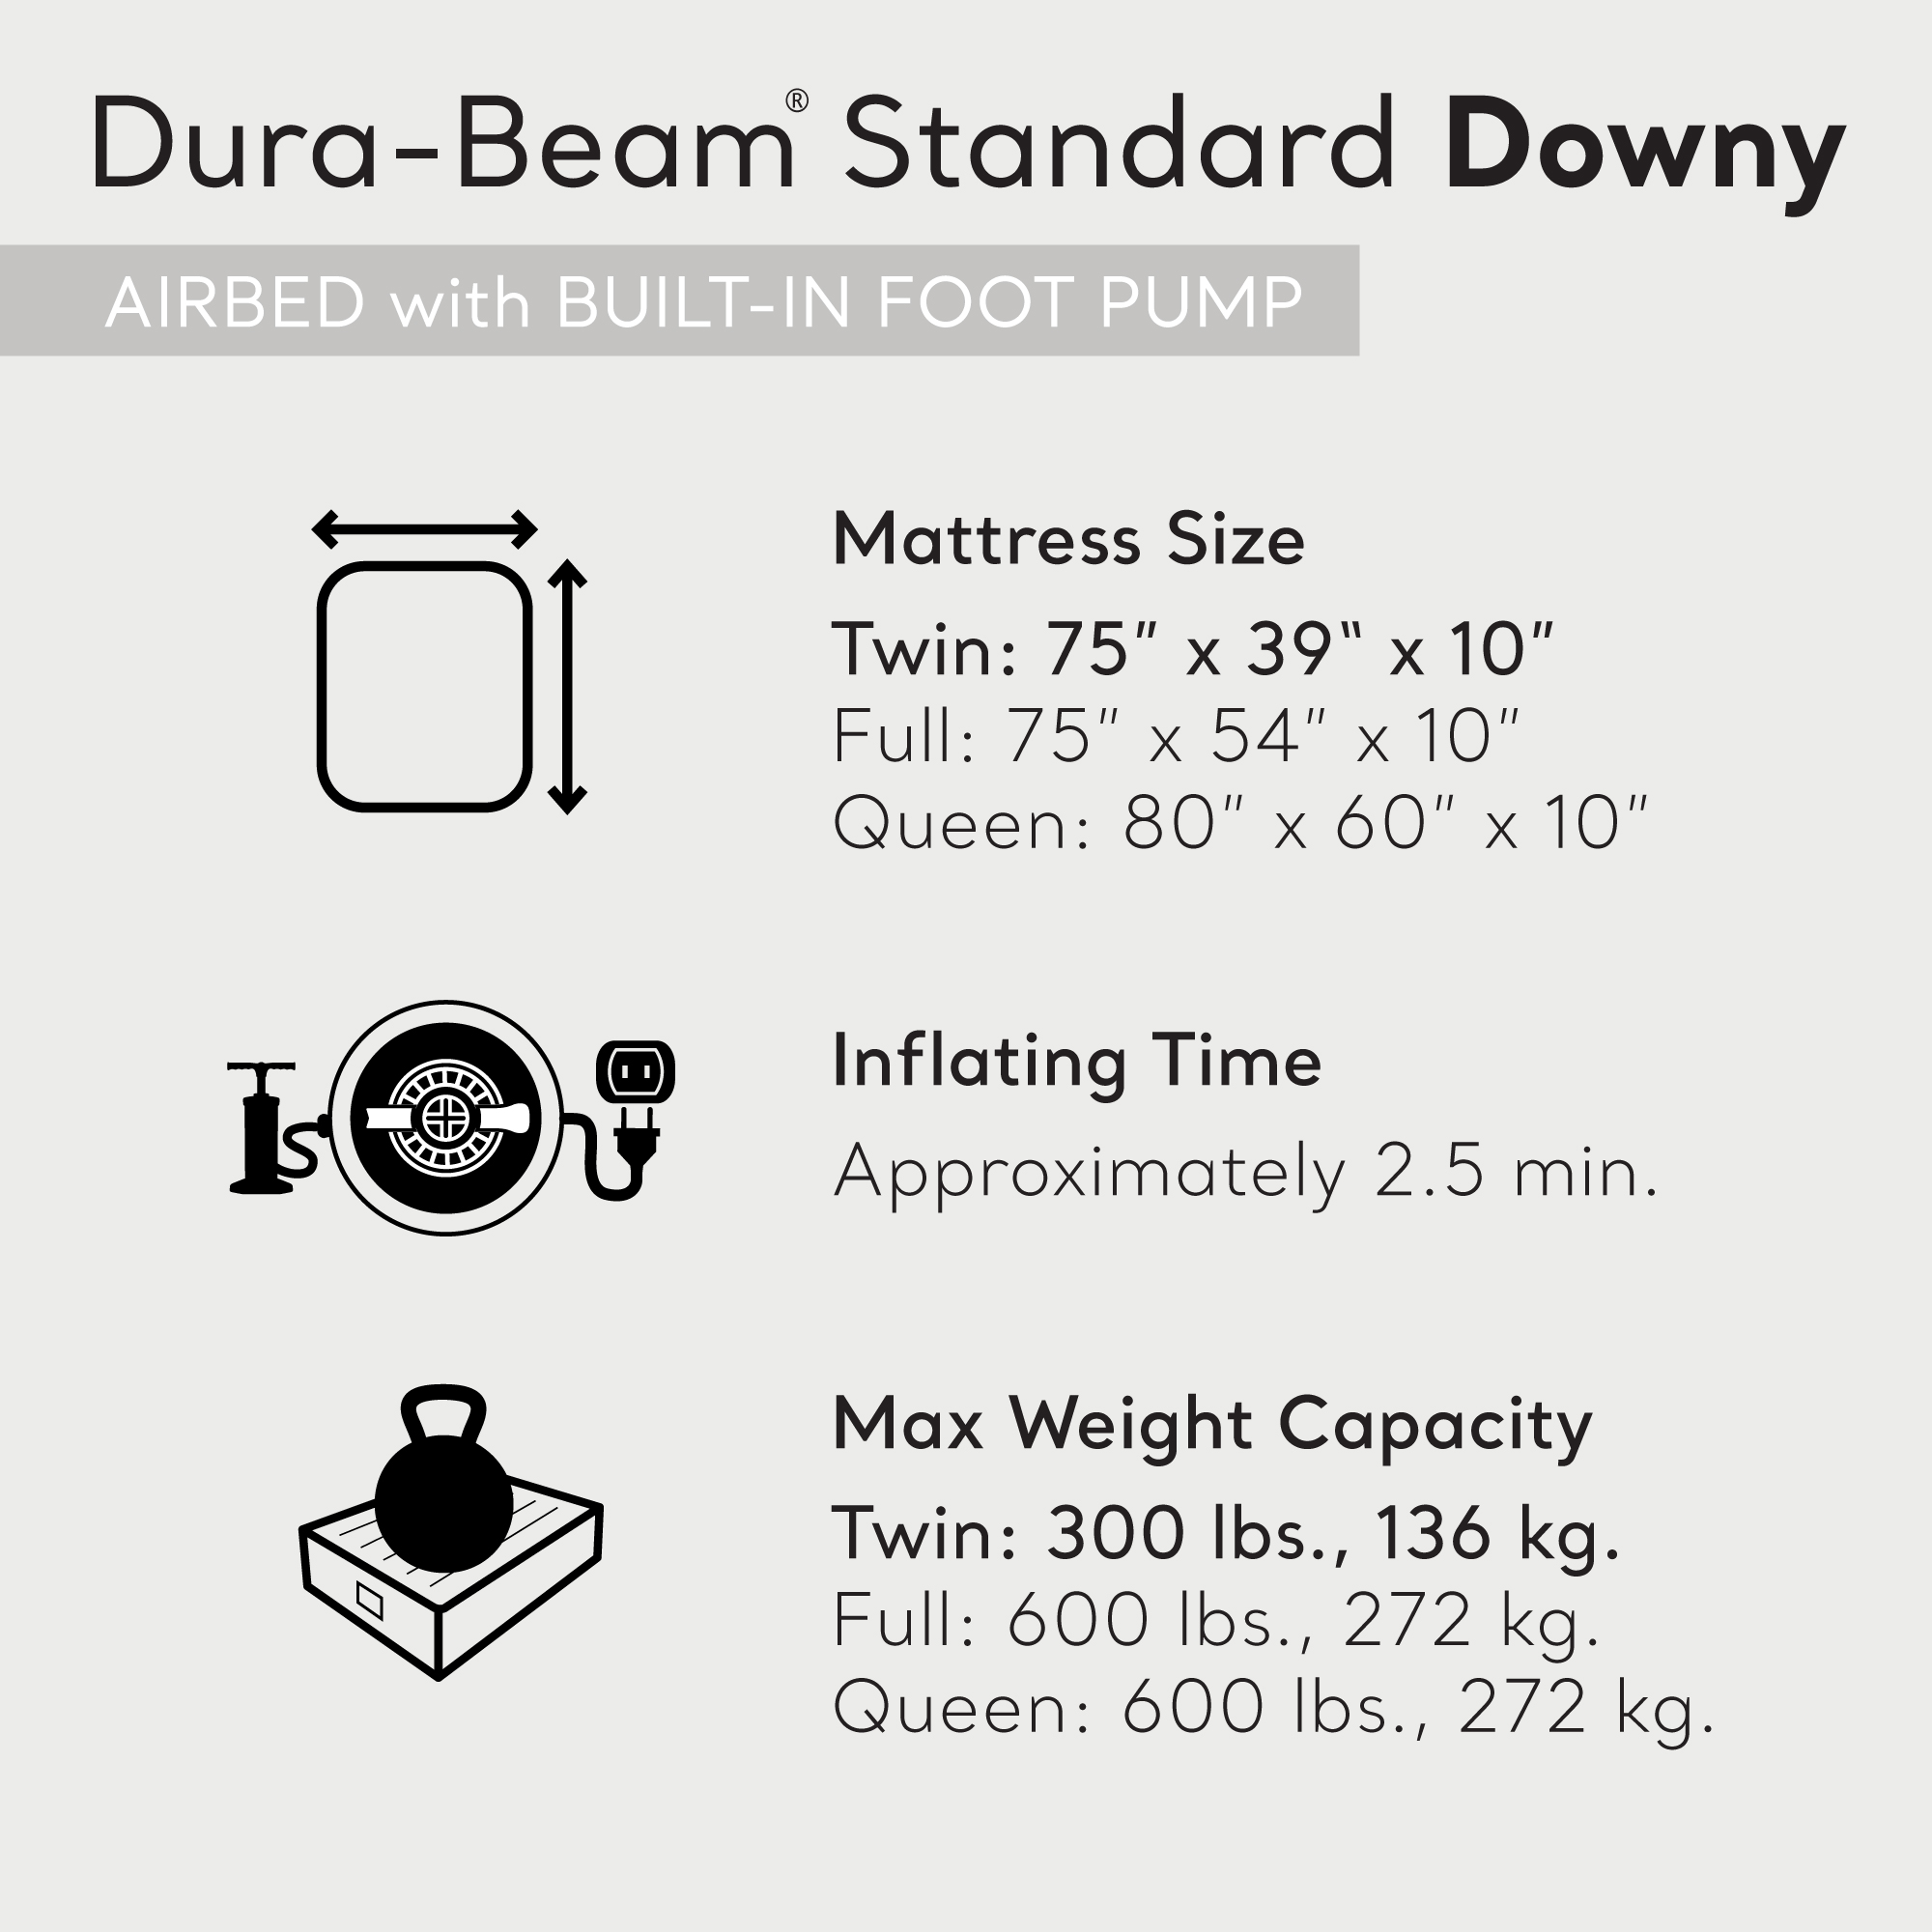 Intex Dura-Beam Standard Series Downy Airbed with Built-In Foot Pump, Twin Size - image 3 of 9